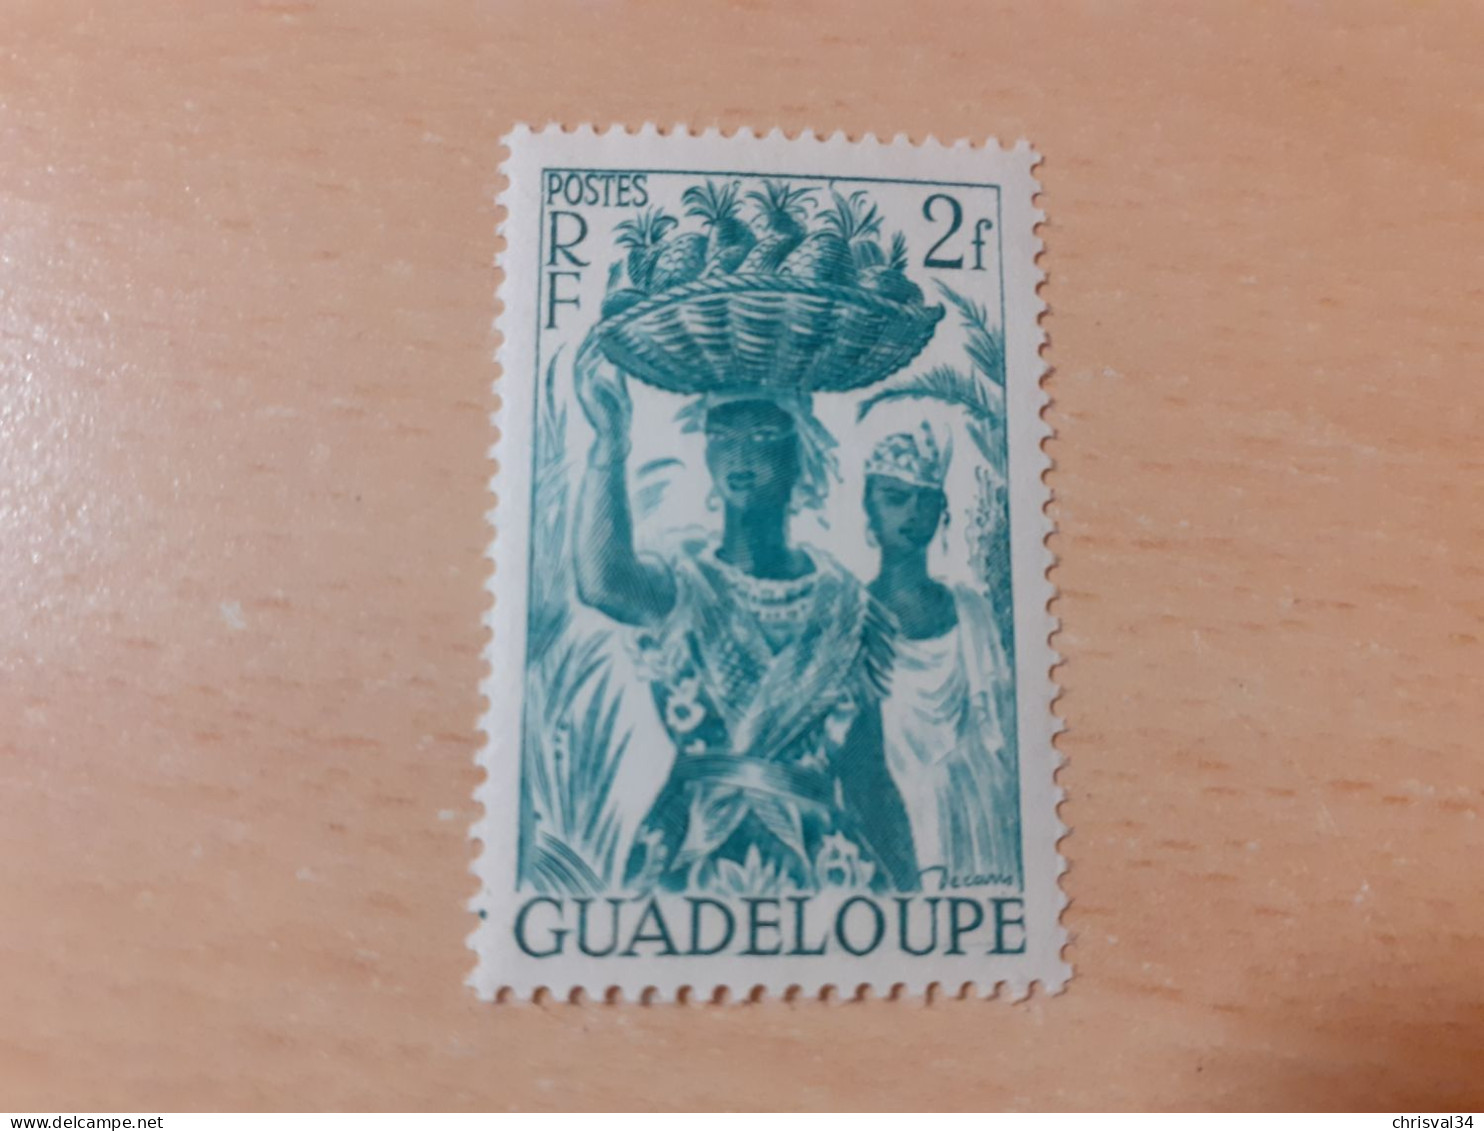 TIMBRE   GUADELOUPE       N  203    COTE  1,50   EUROS  NEUF  TRACE  CHARNIERE - Nuevos